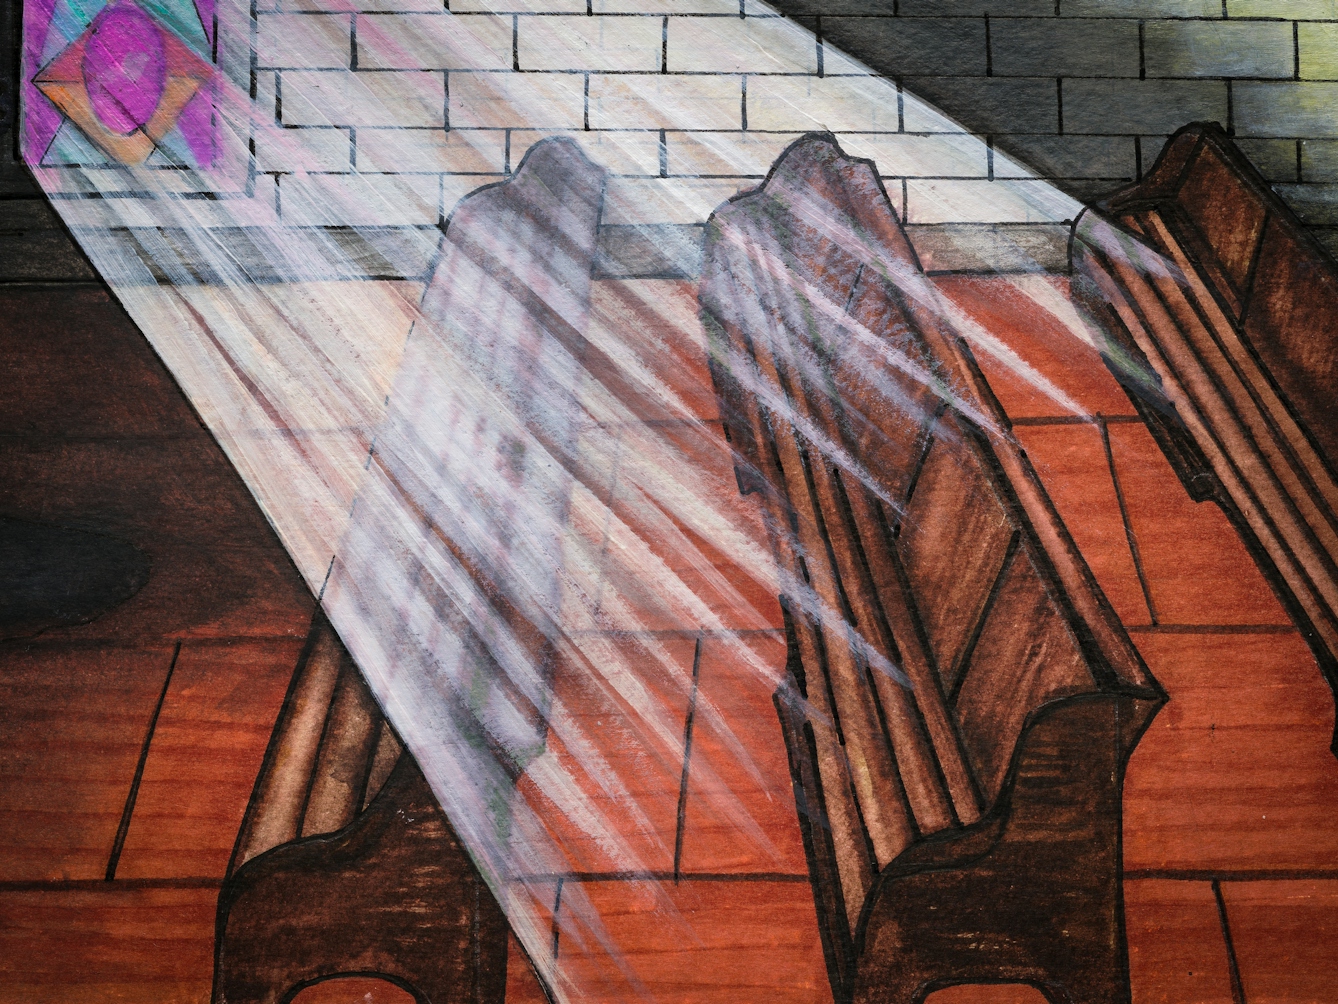 Detail from larger colourful artwork made with paint and ink on textured watercolour paper. The artwork shows a scene in a church with predominantly hues of greys, browns and purples. In the foreground are 3 rows of pews bathed in a shaft of light streaming in through an arch shaped purple patterned stained glass window in the grey brick wall behind.